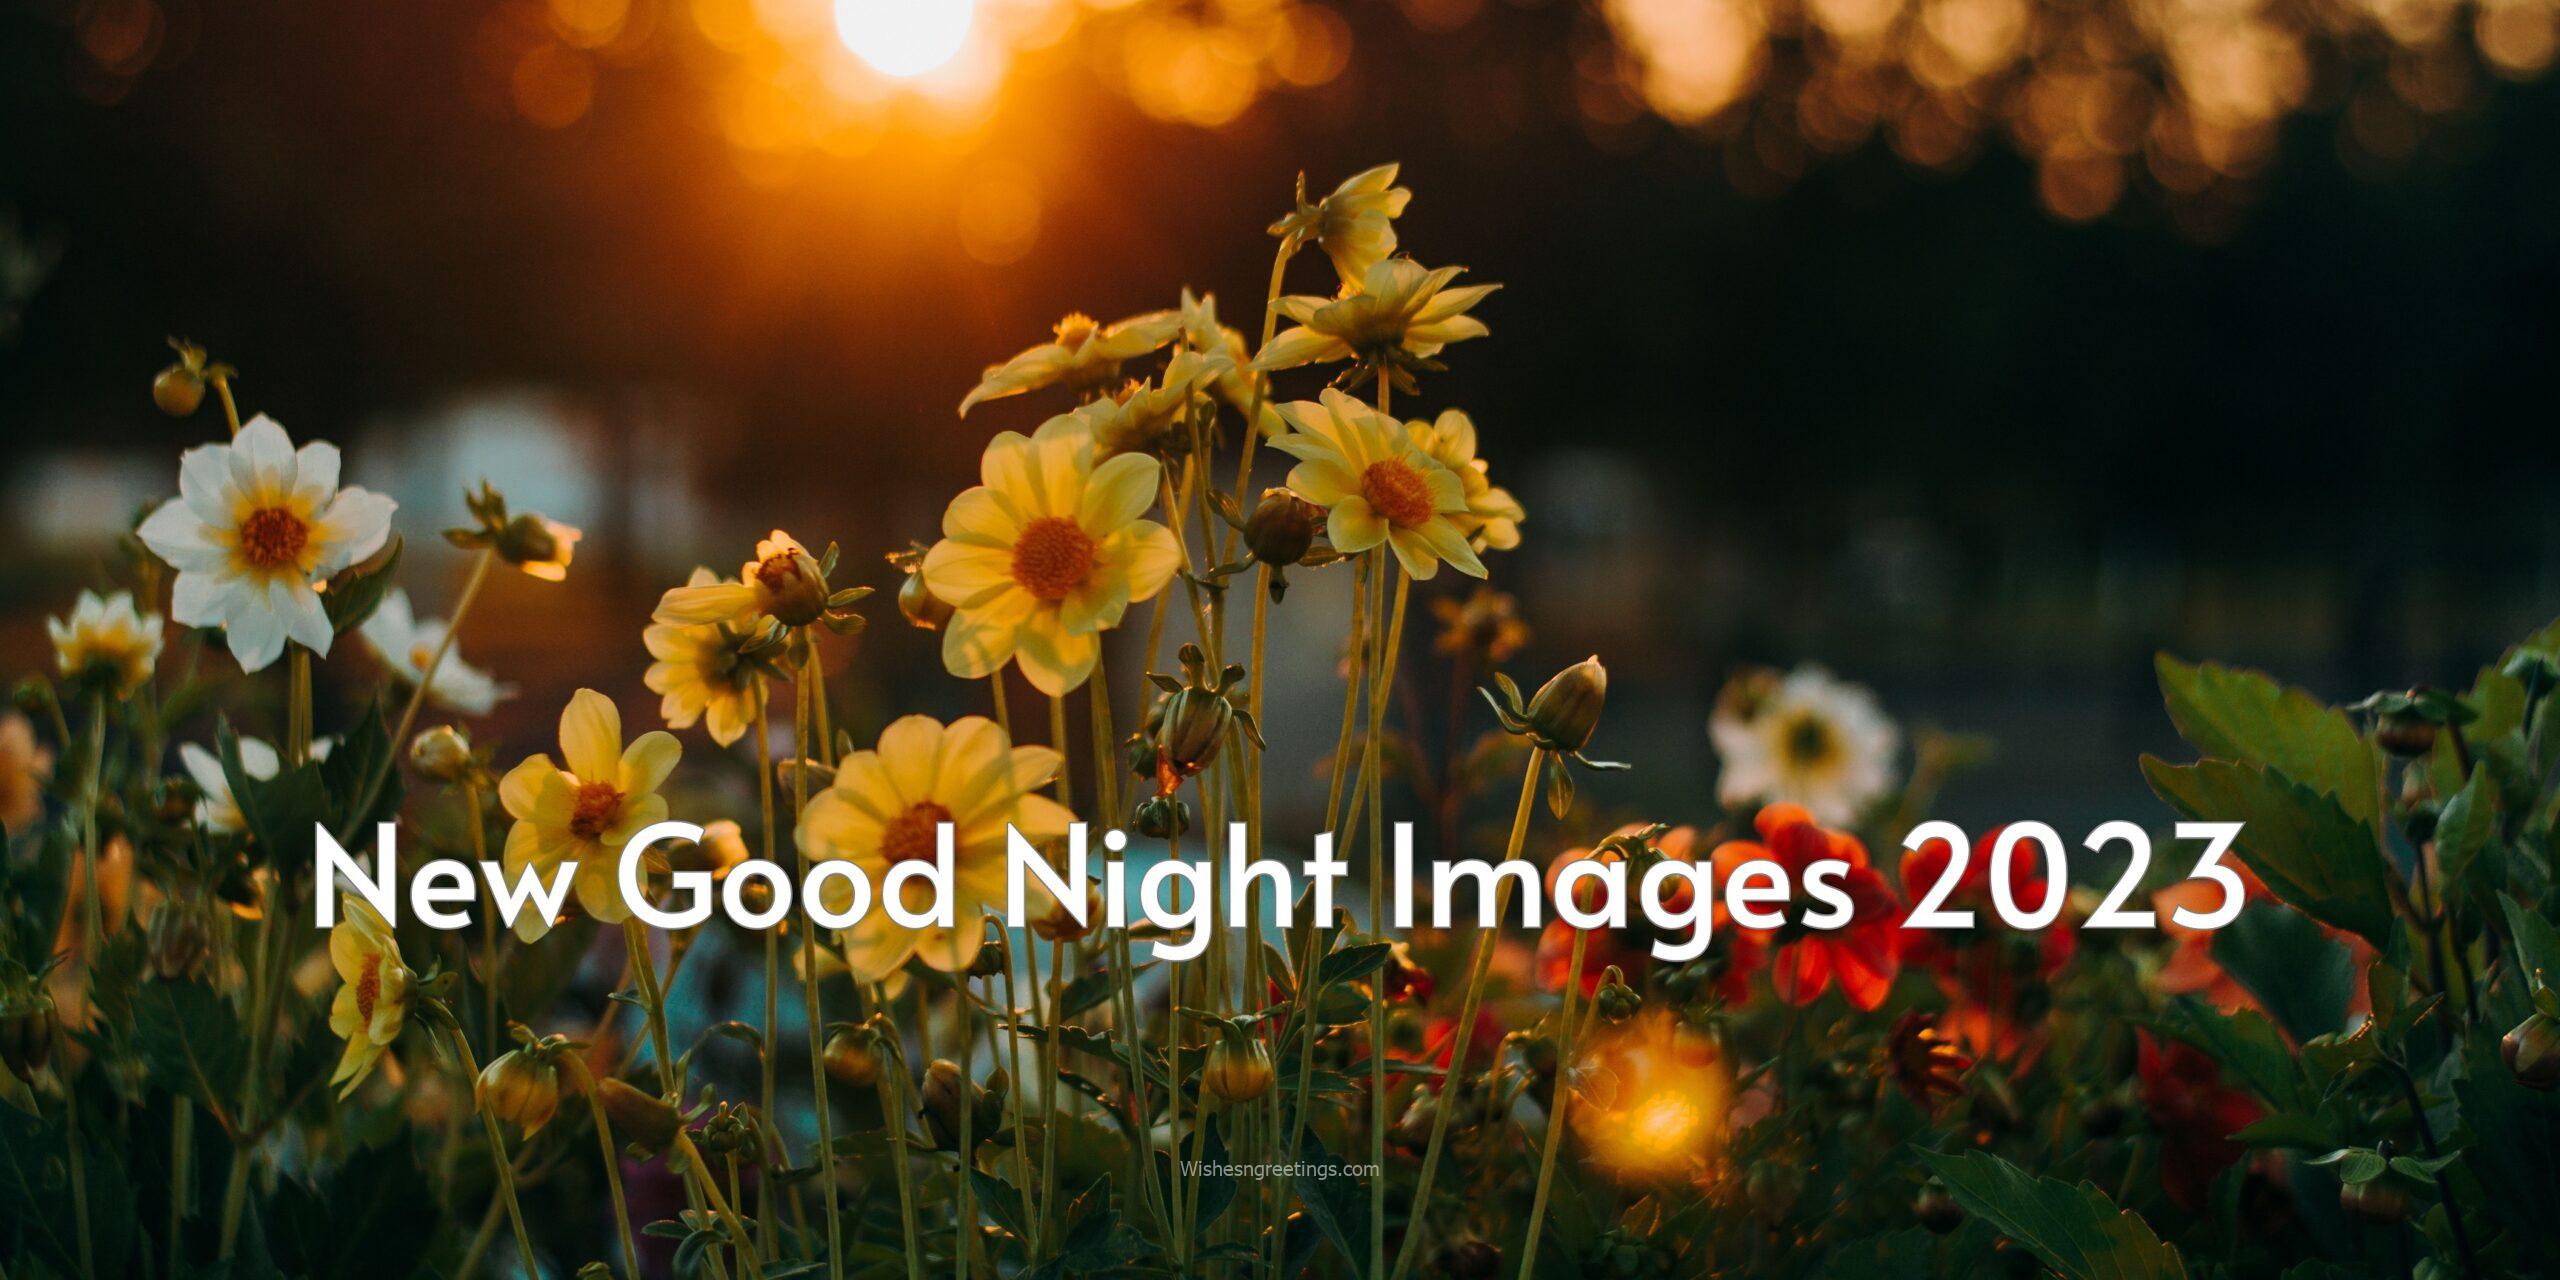 new good night images 2023 featured banner